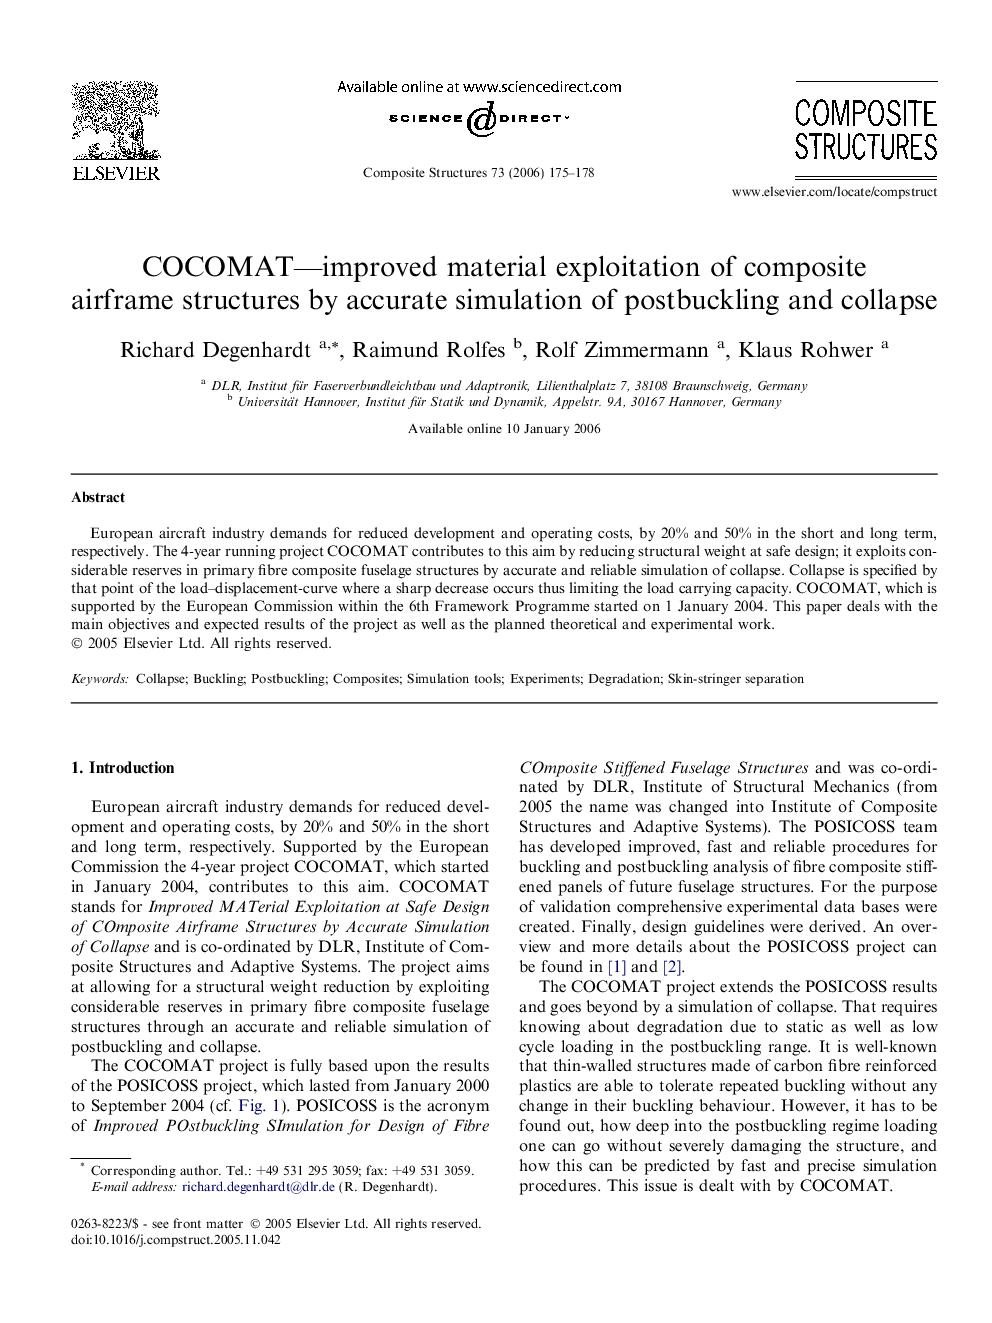 COCOMAT—improved material exploitation of composite airframe structures by accurate simulation of postbuckling and collapse